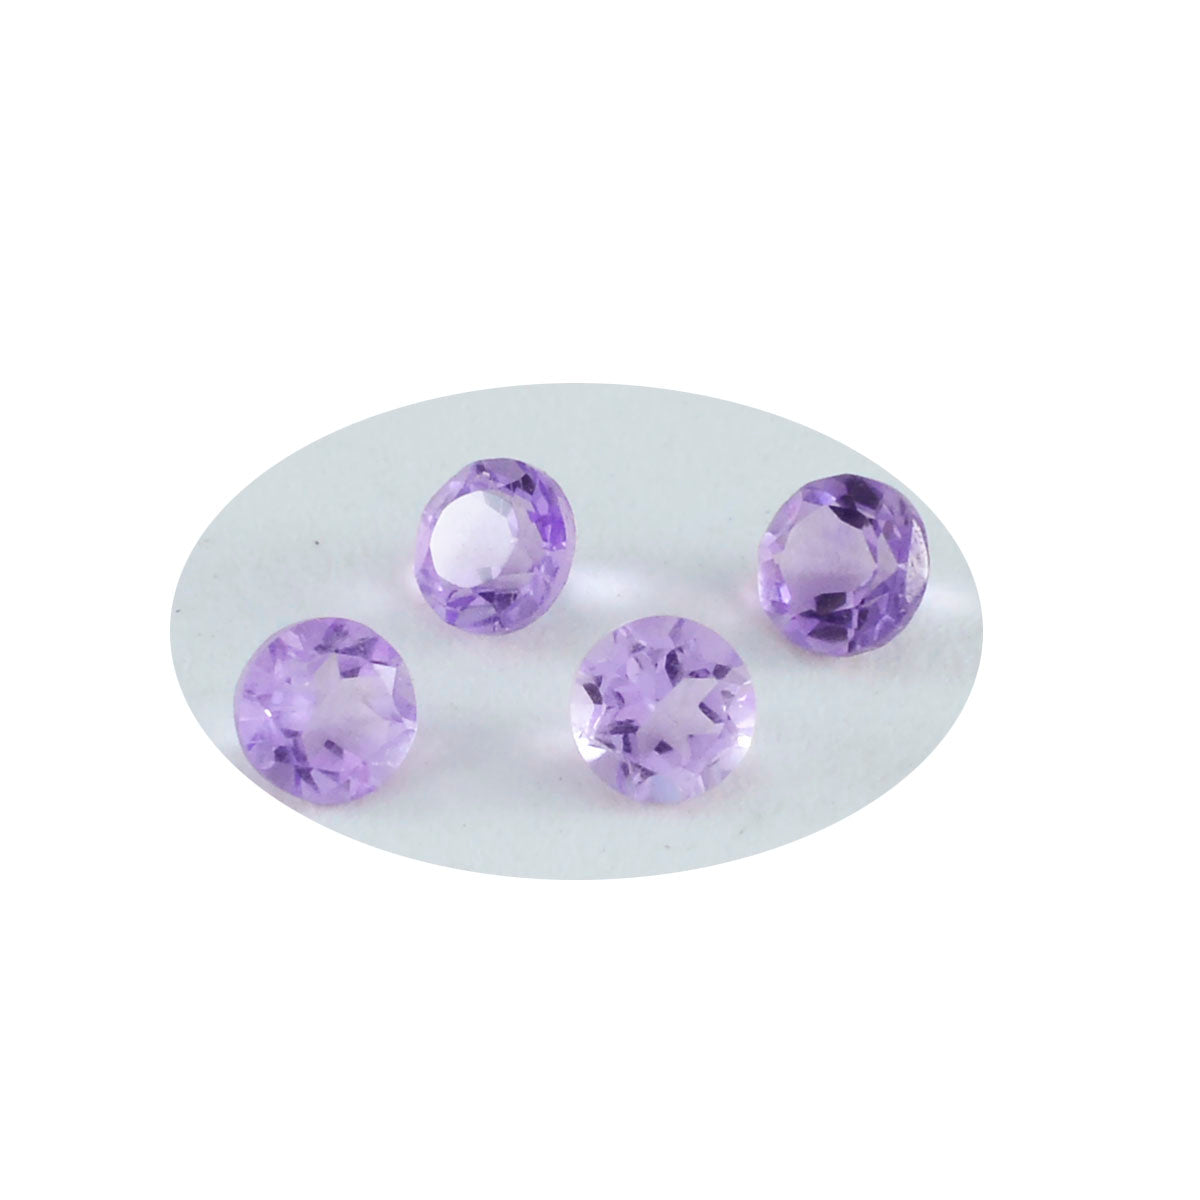 Riyogems 1PC Natural Purple Amethyst Faceted 7x7 mm Round Shape awesome Quality Loose Gems